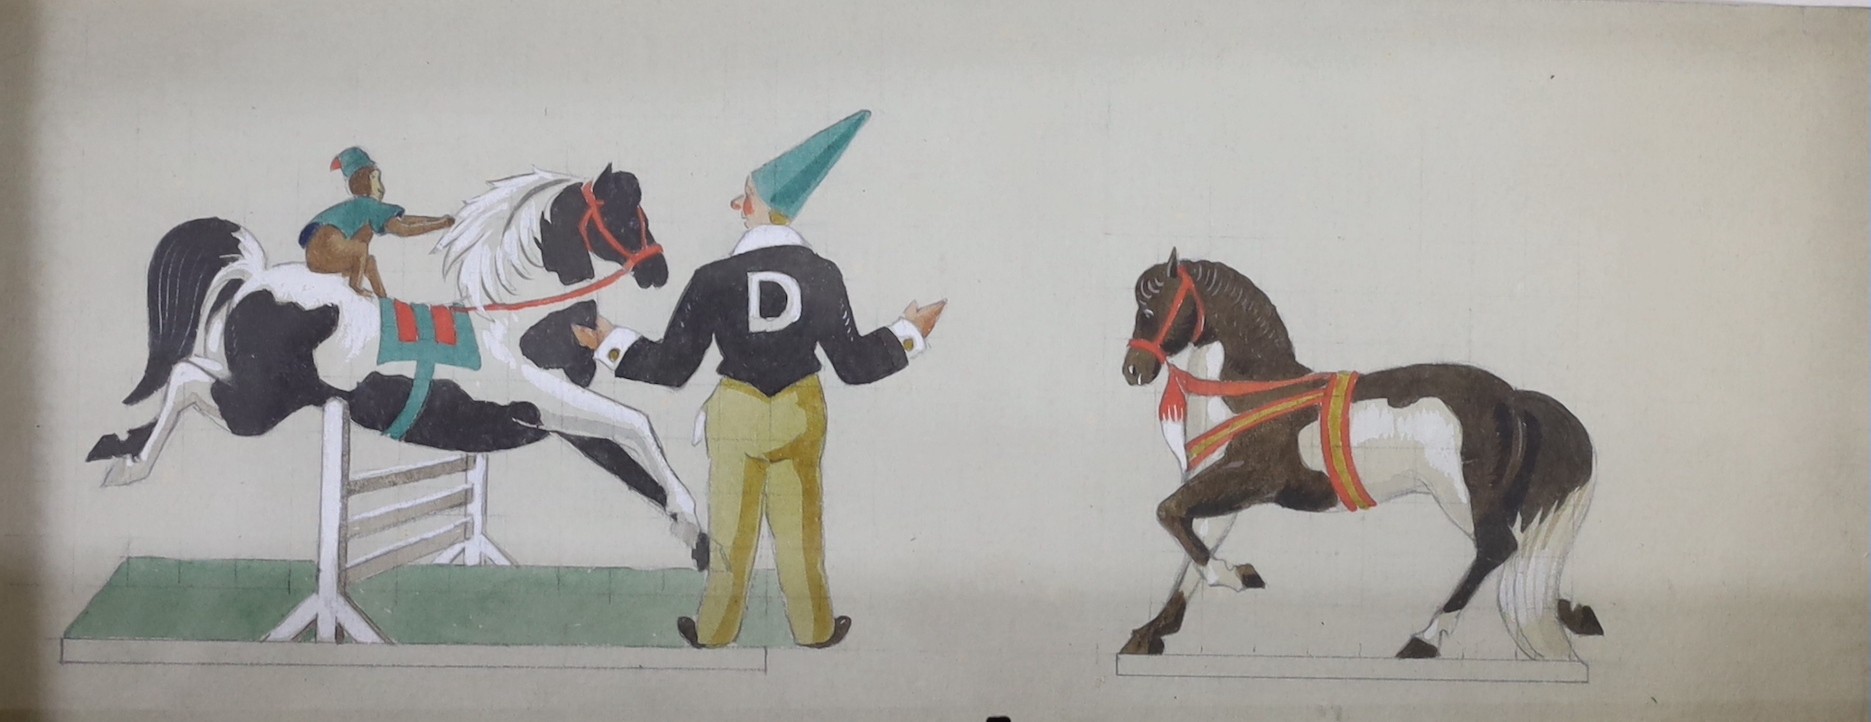 Mary Adshead (1904-1995), gouache on paper, Clown training a circus monkey and two horses, Liss Fine Art label verso, 15 x 37cm